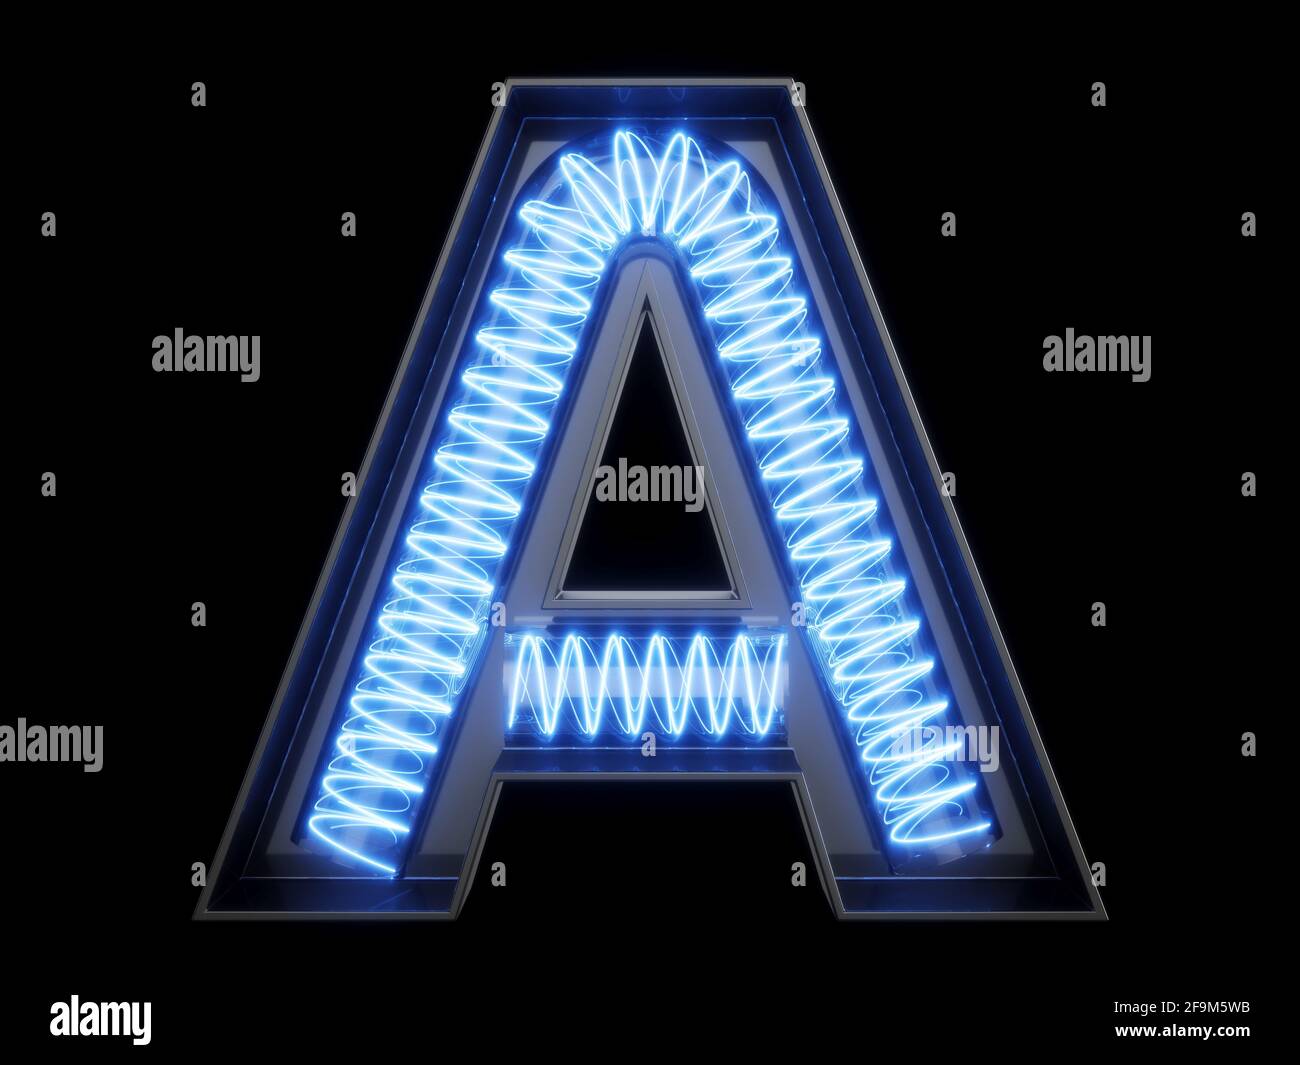 Light bulb glowing letter alphabet character A font. Front view illuminated capital symbol on black background. 3d rendering illustration Stock Photo